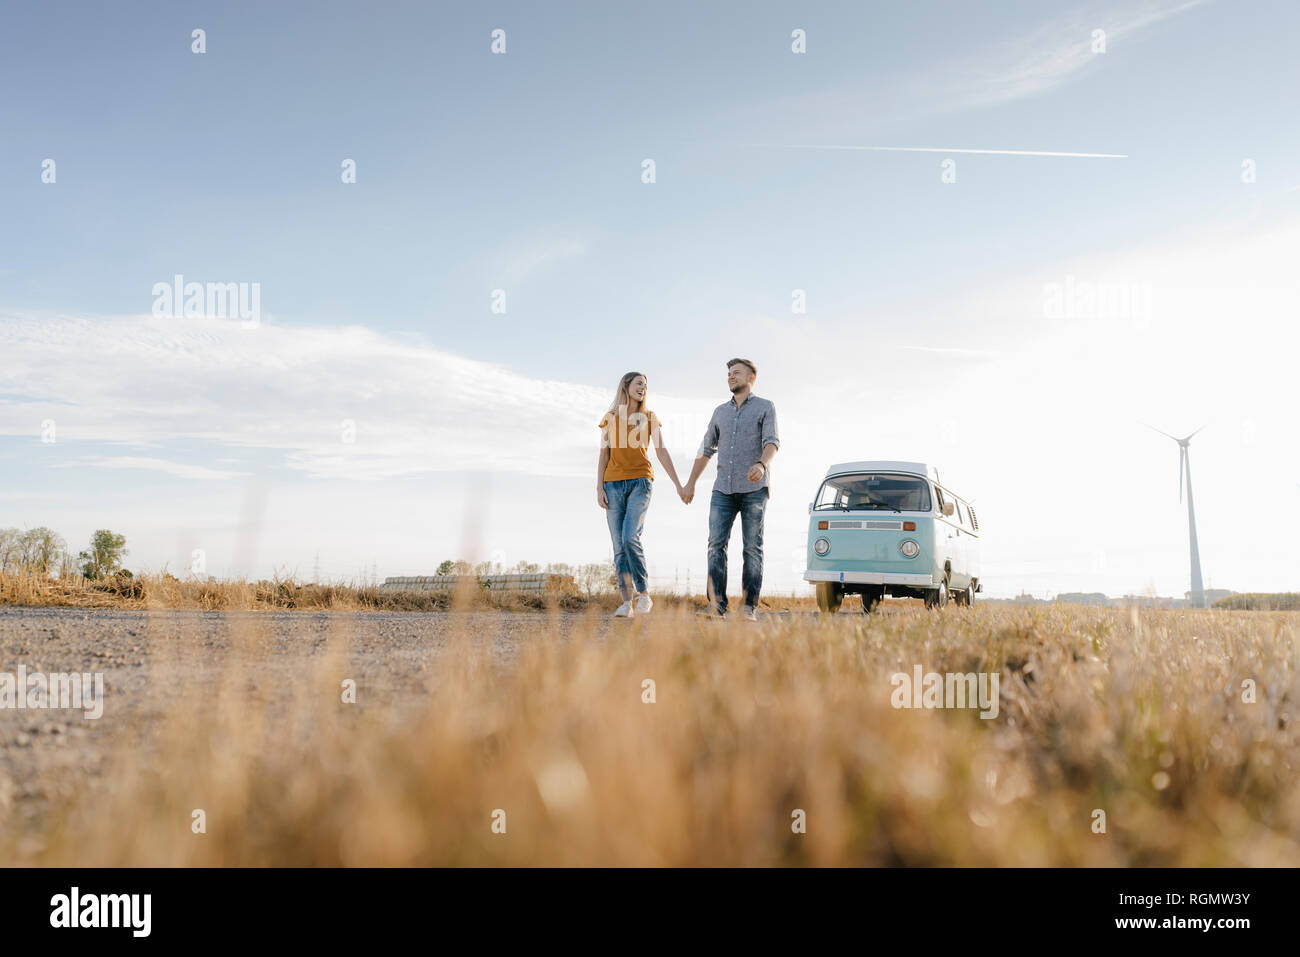 Young couple walking on dirt track at camper van in rural landscape Stock Photo